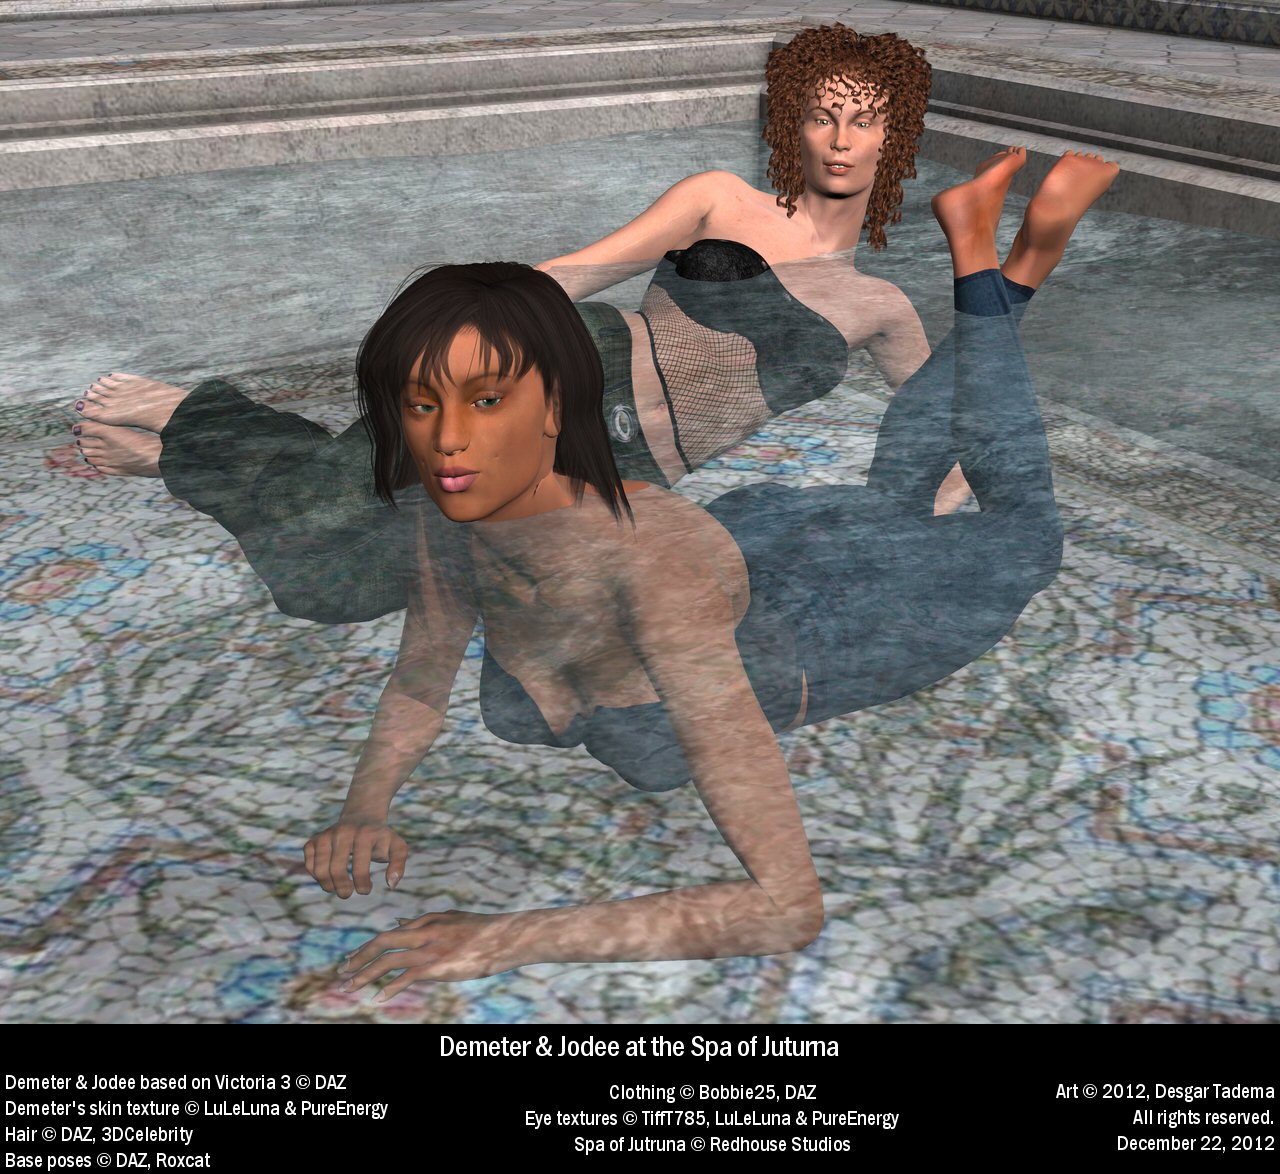 Demeter and Jodee at the Spa of Juturna